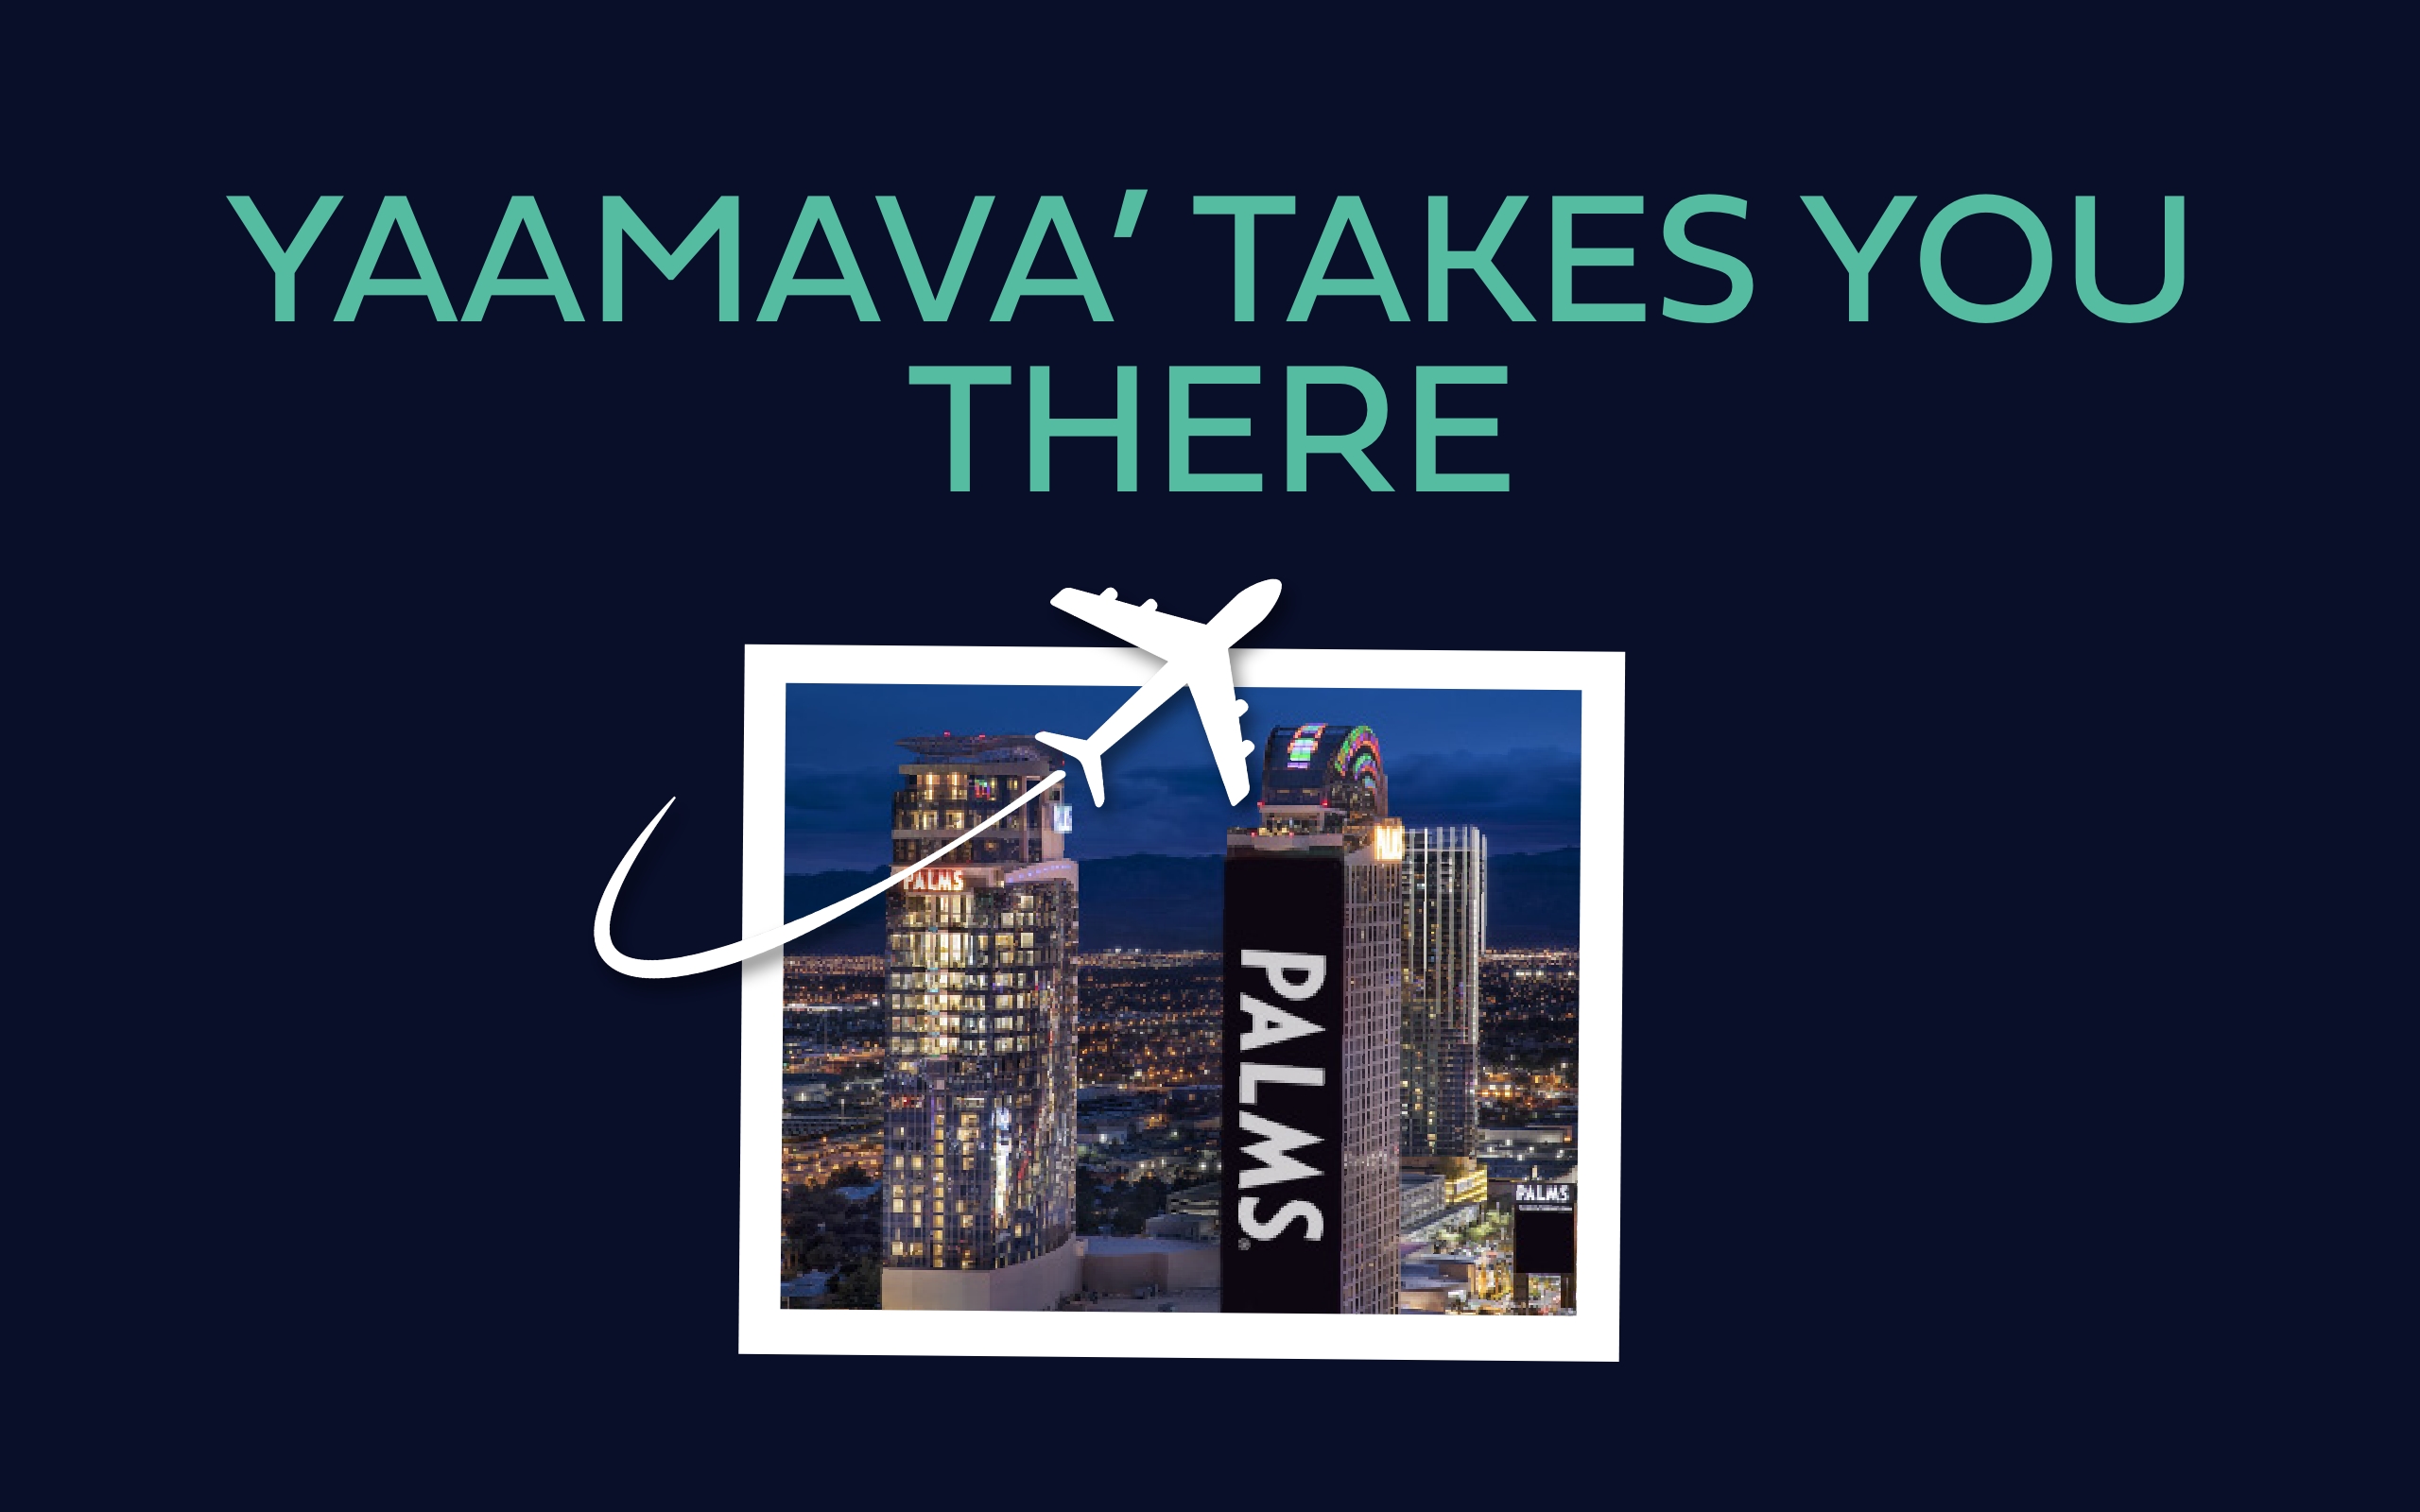 Yaamava' Takes You There